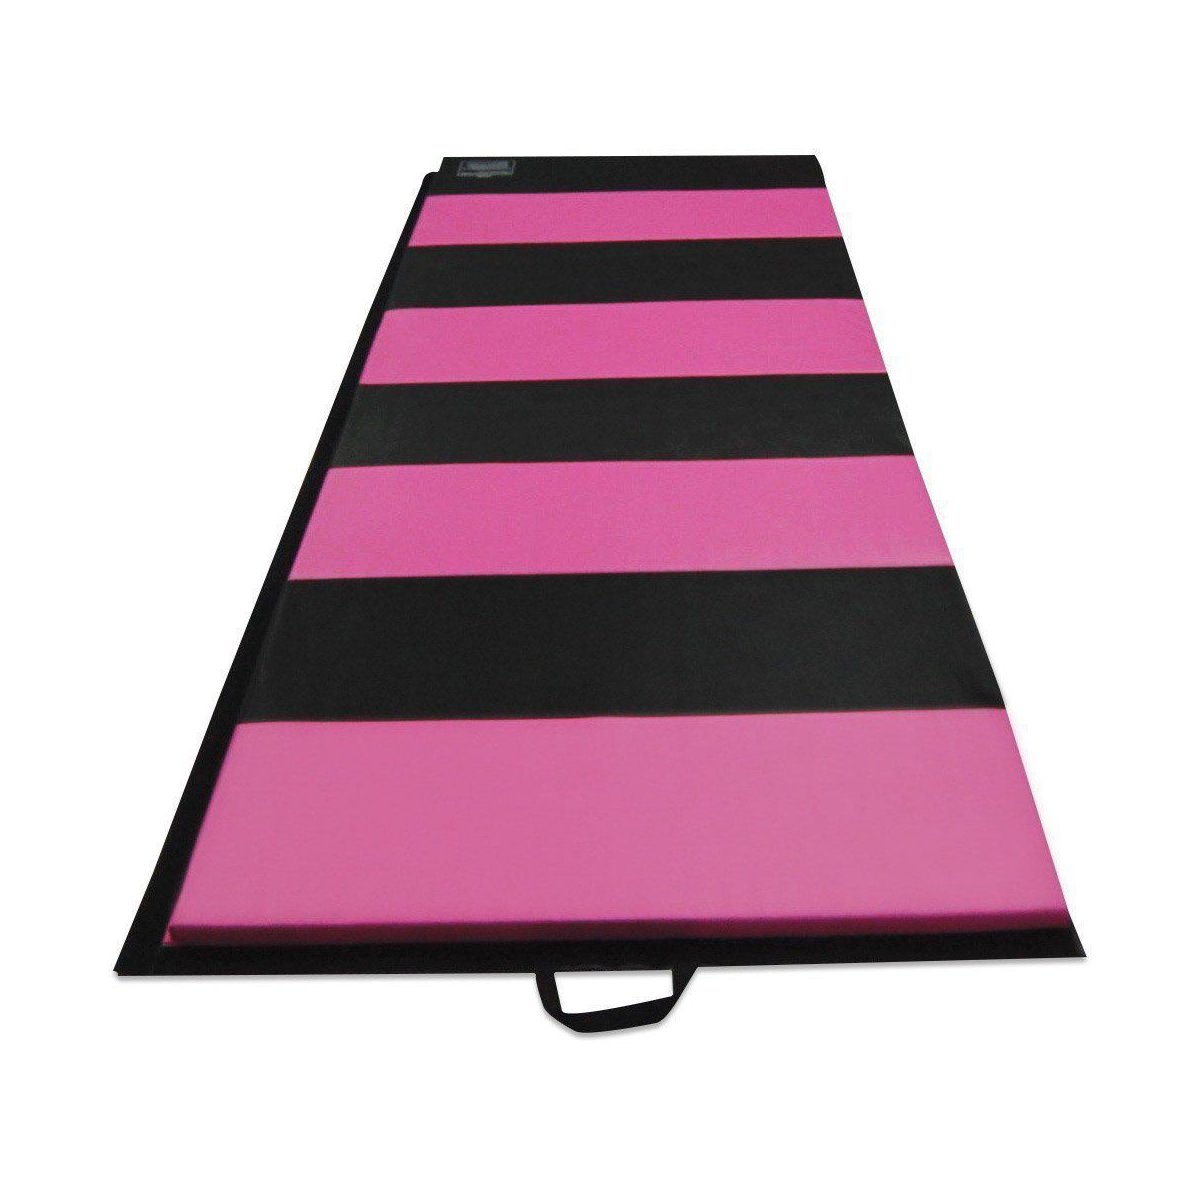 70x47x197inch-Foldable-Gymnastic-Mat-Exercise-Yoga-Fitness-Workout-Tumbling-Pad-1245140-4